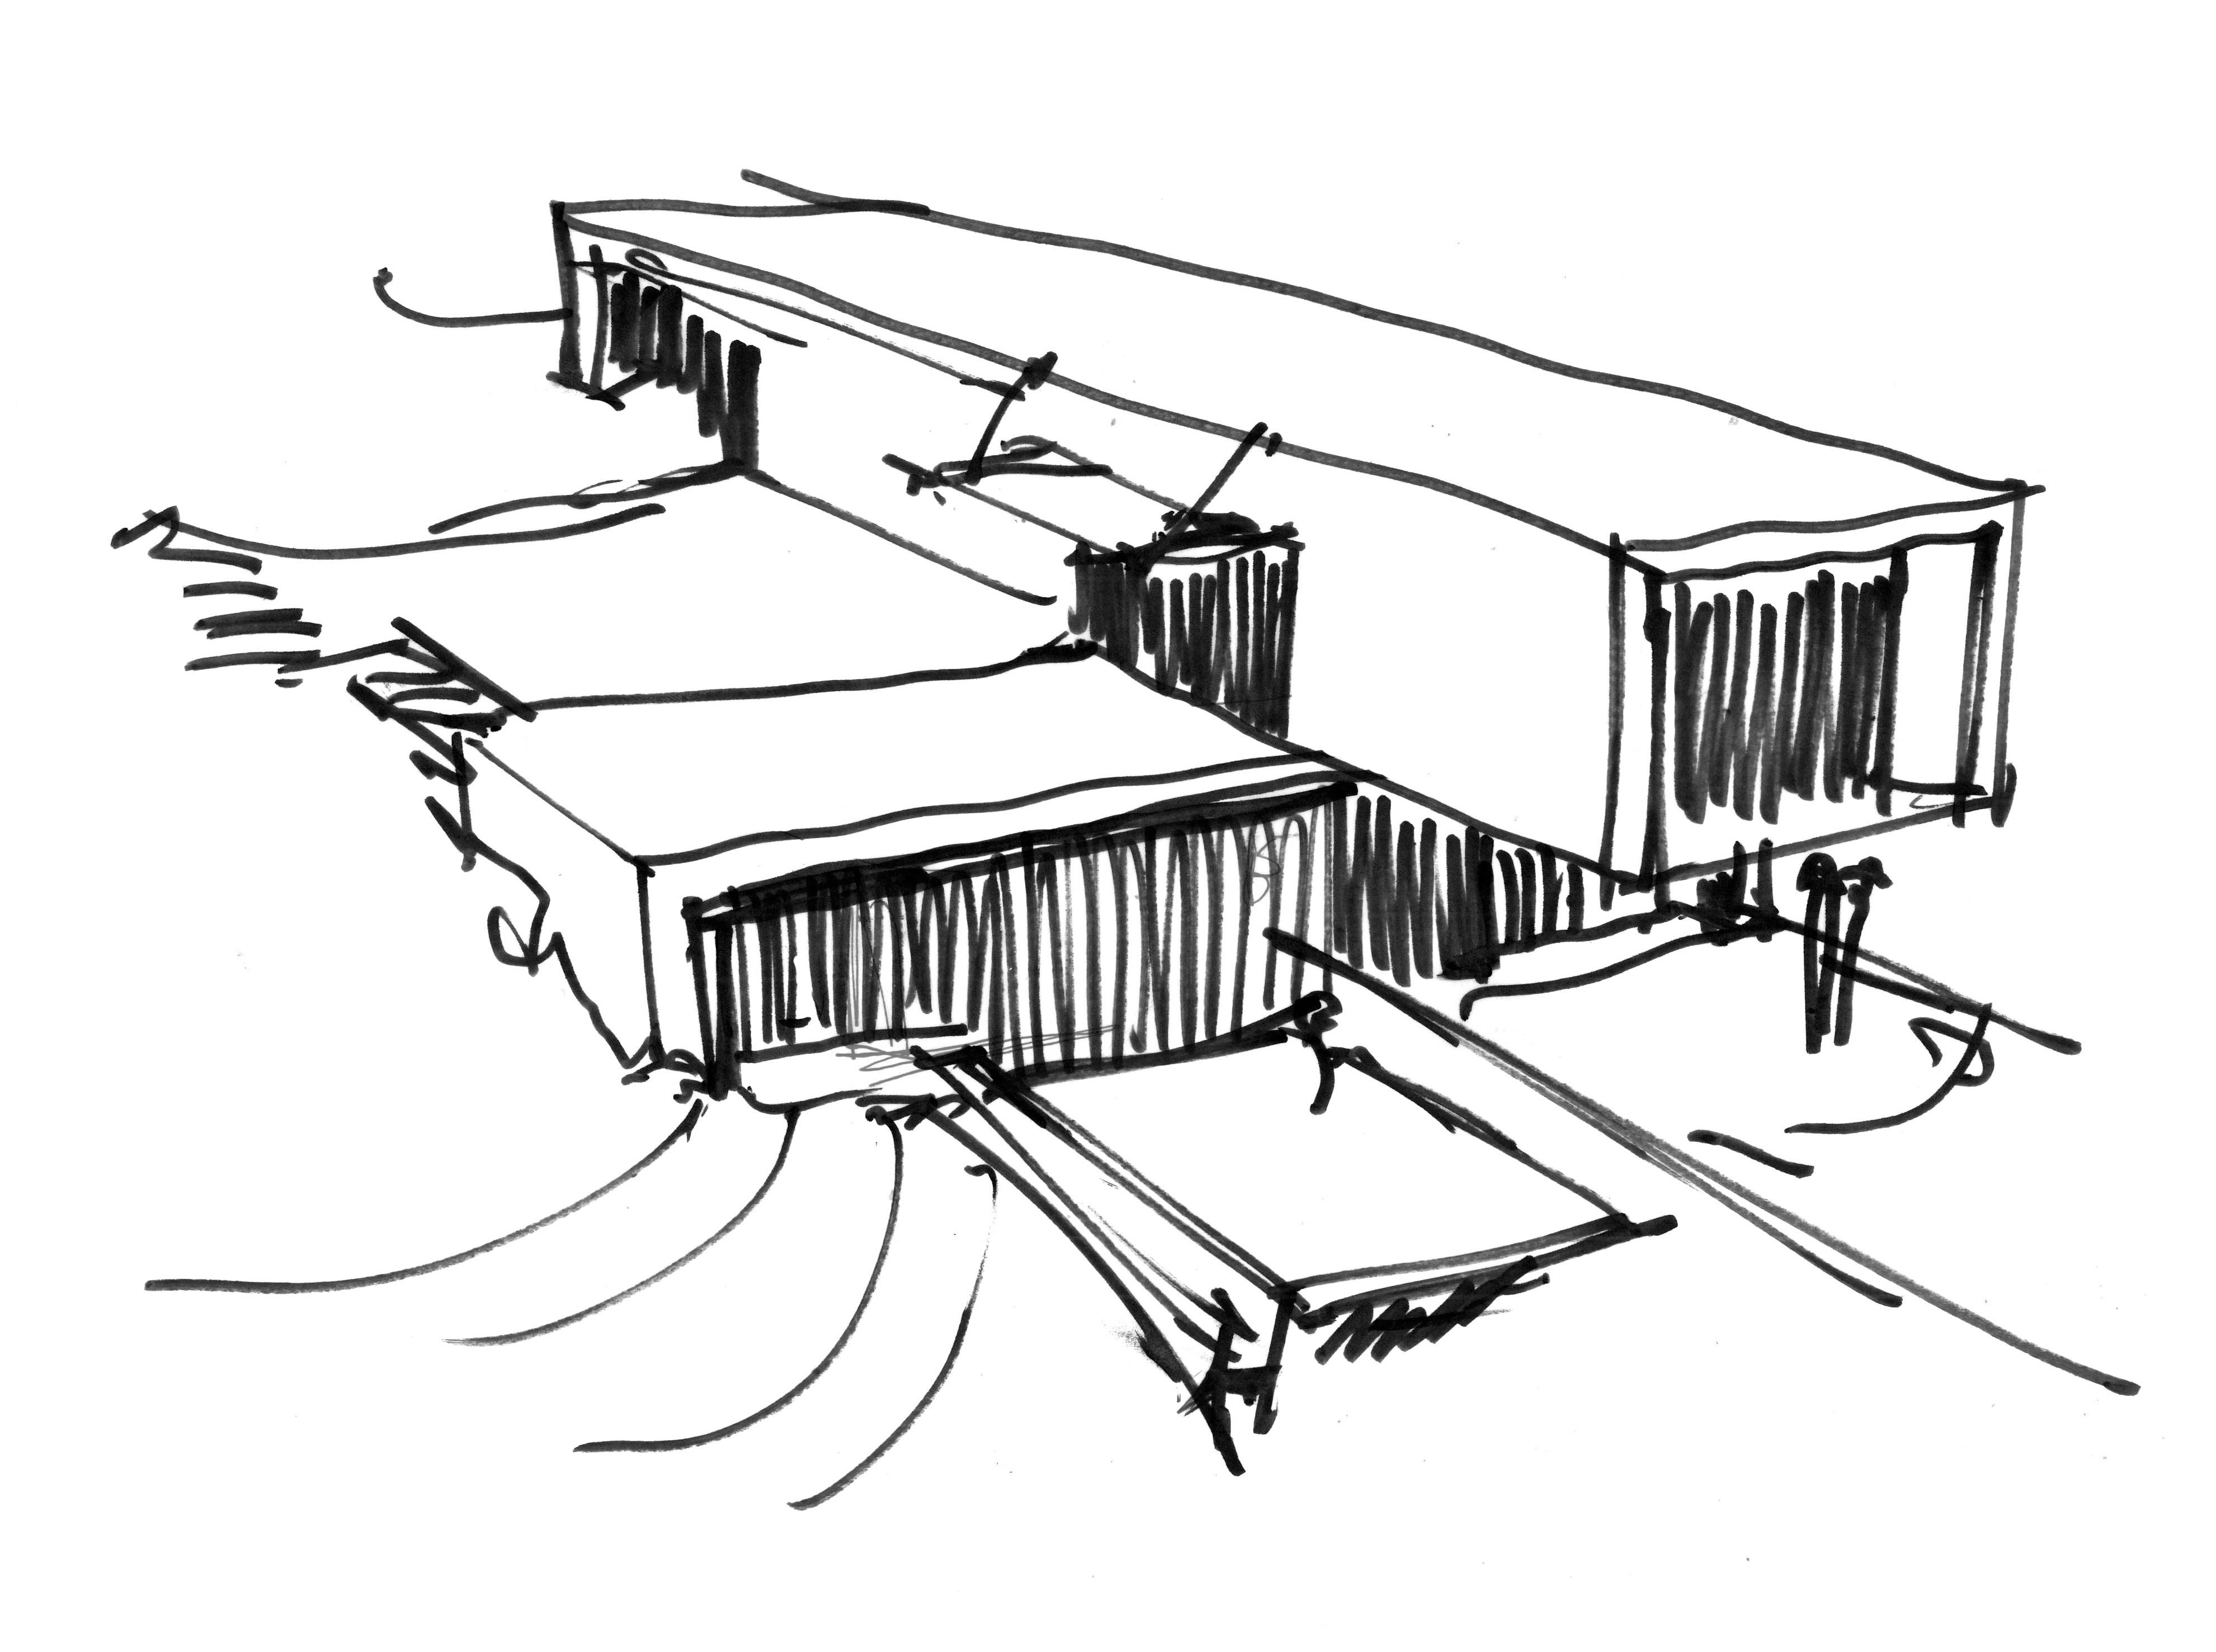 modern-axis-house-perspective-sketch-03-edit